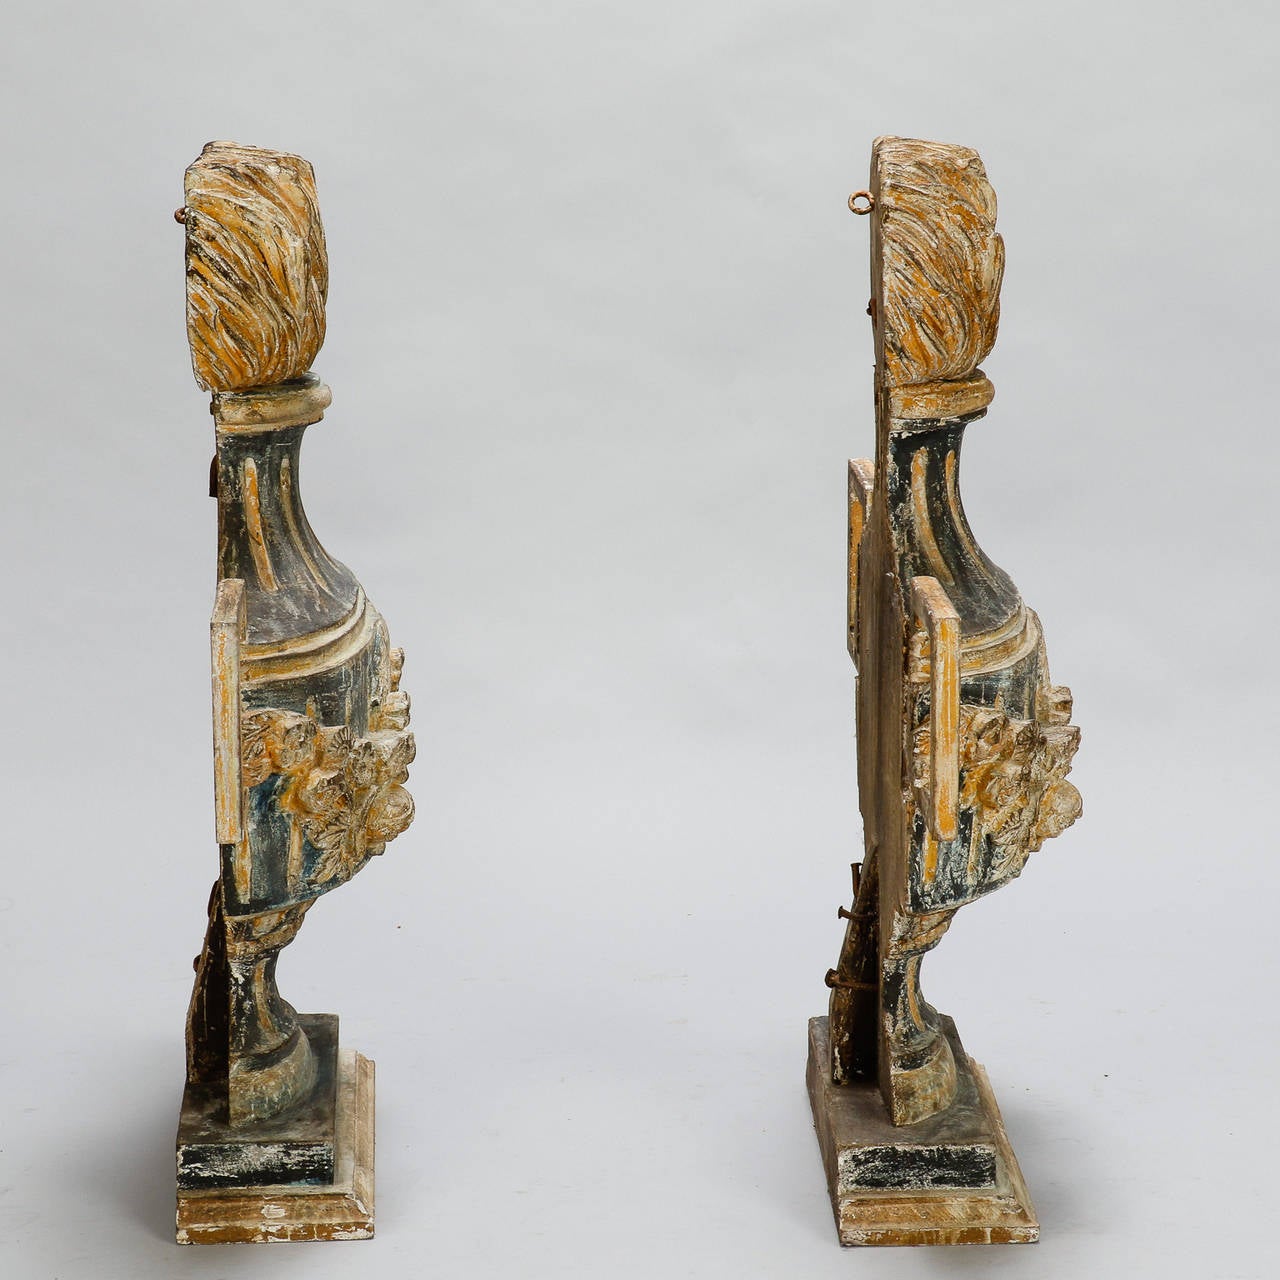 Pair of 19th Century Italian Carved Wood Decorative Urns 4